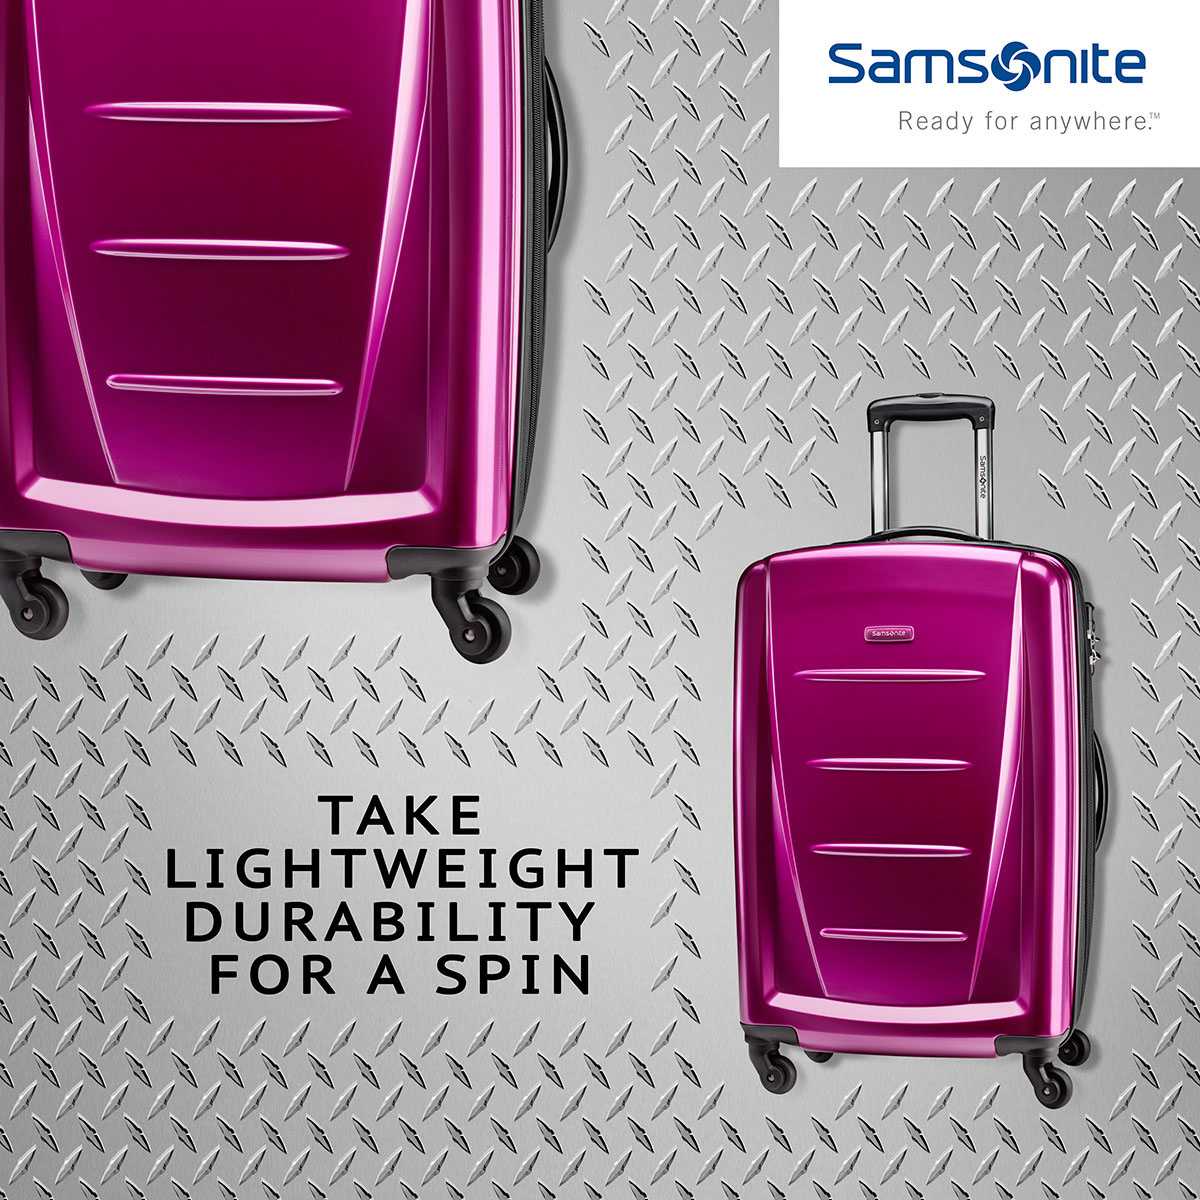 samsonite American Tourister luggage Product Photography still life table top baggage light weight strength Fun conceptual